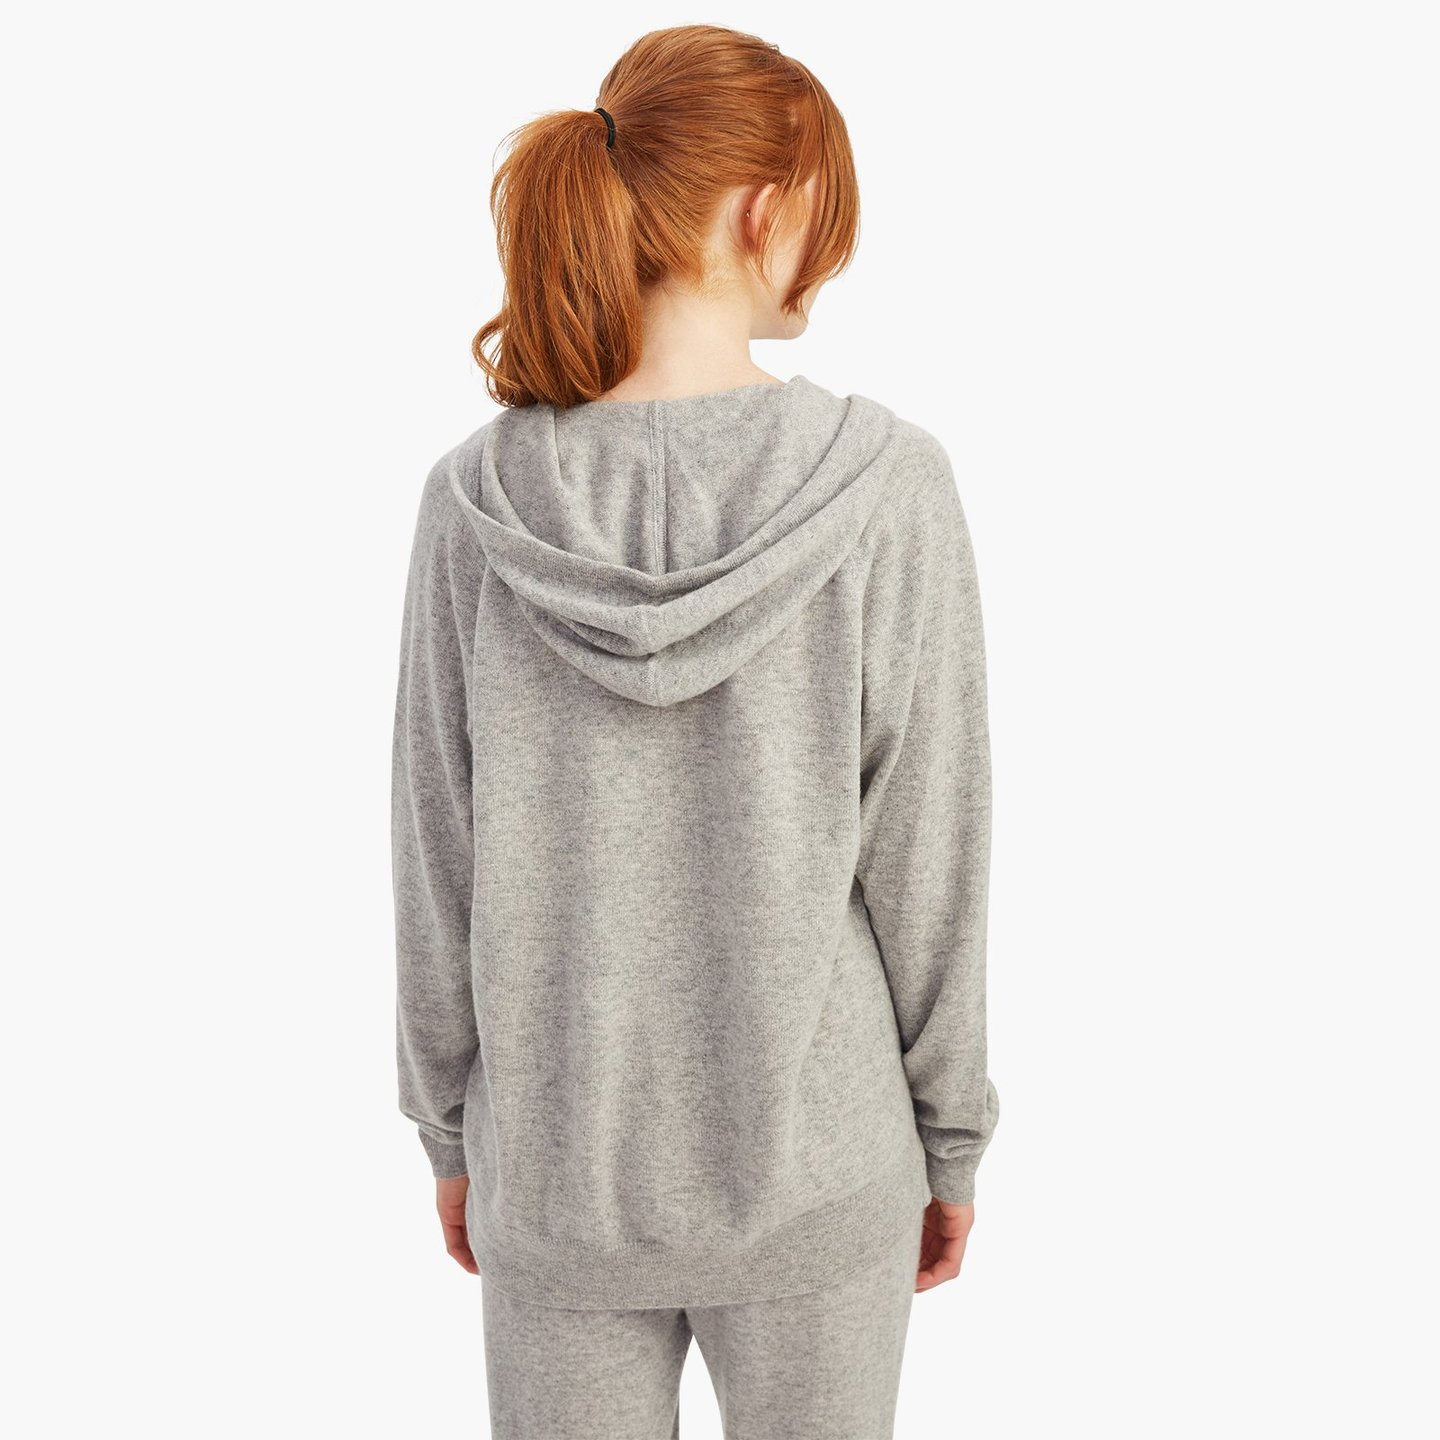 NWEJ000796_Cashmere_Zip_Up_Hoodie_Cement_020_1440x.jpg